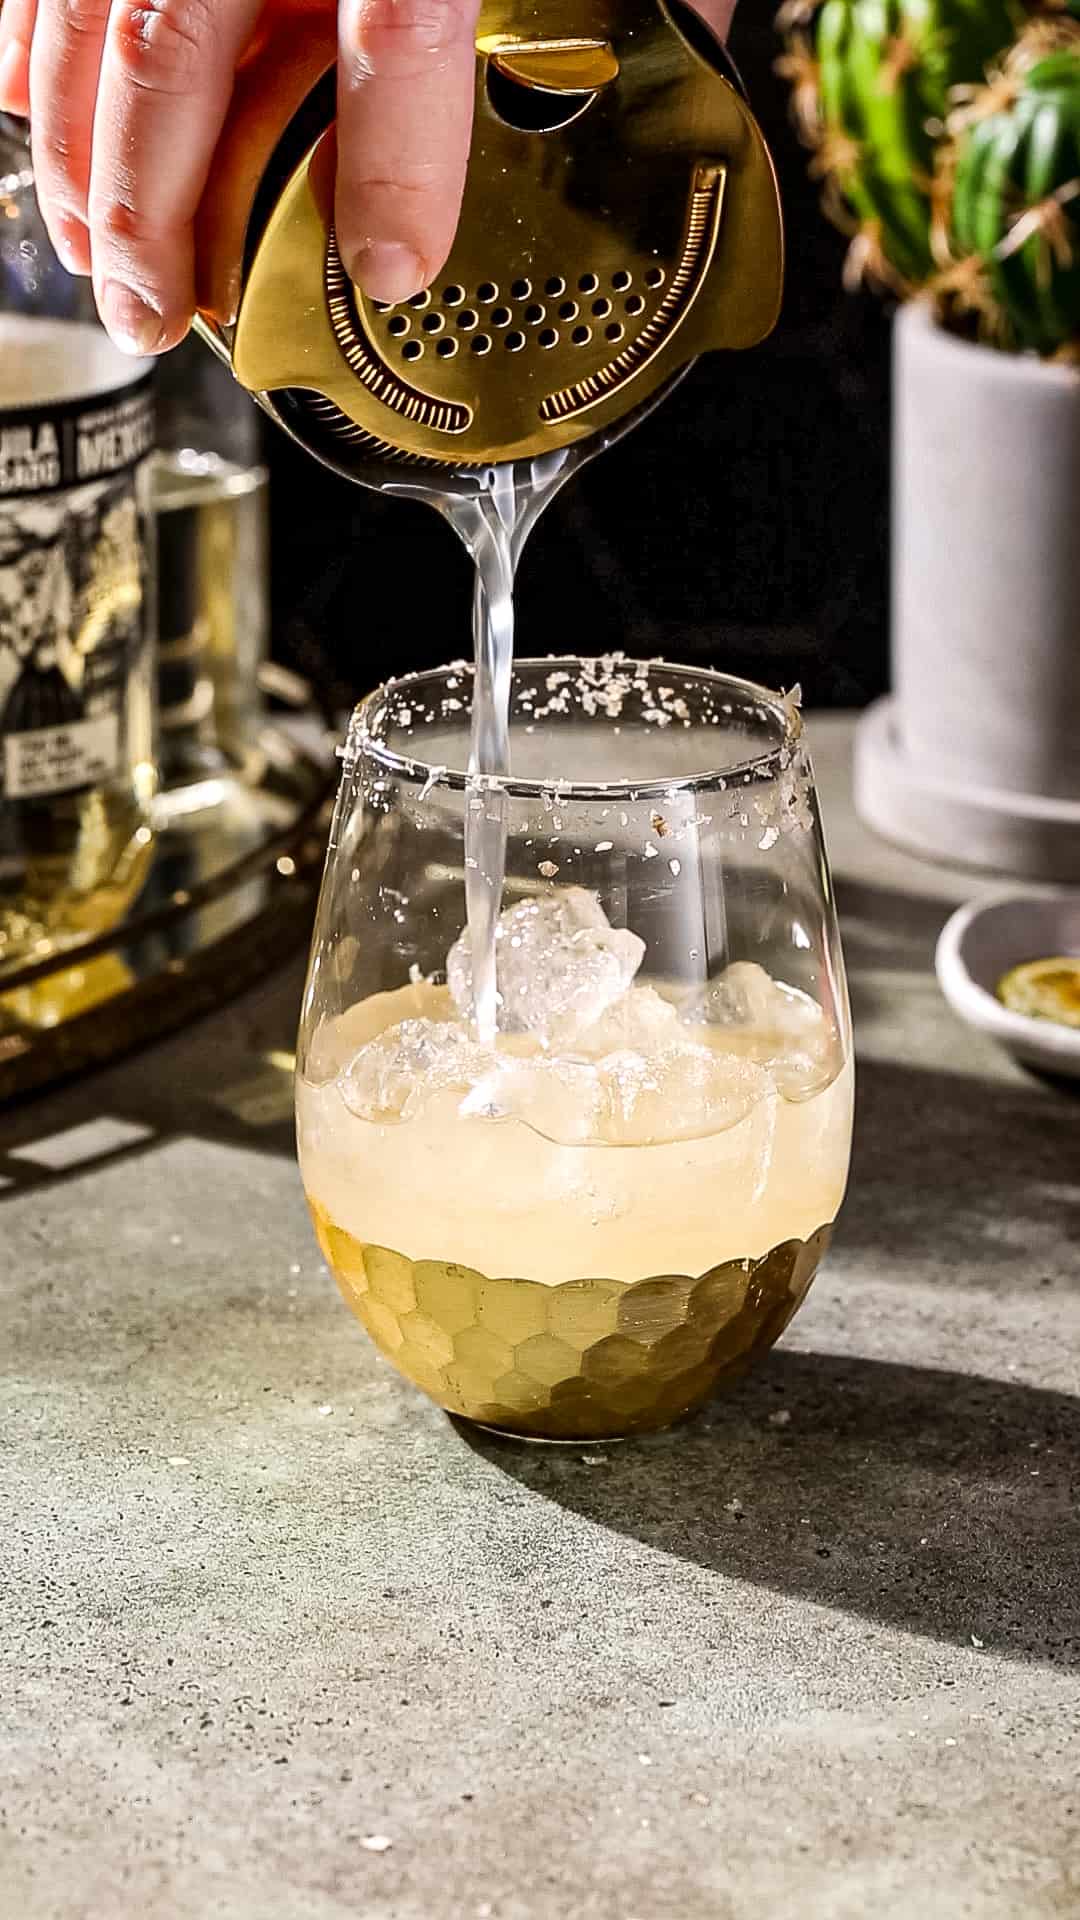 Hand using a gold colored cocktail shaker and strainer to pour a drink into a serving glass that is filled with ice.